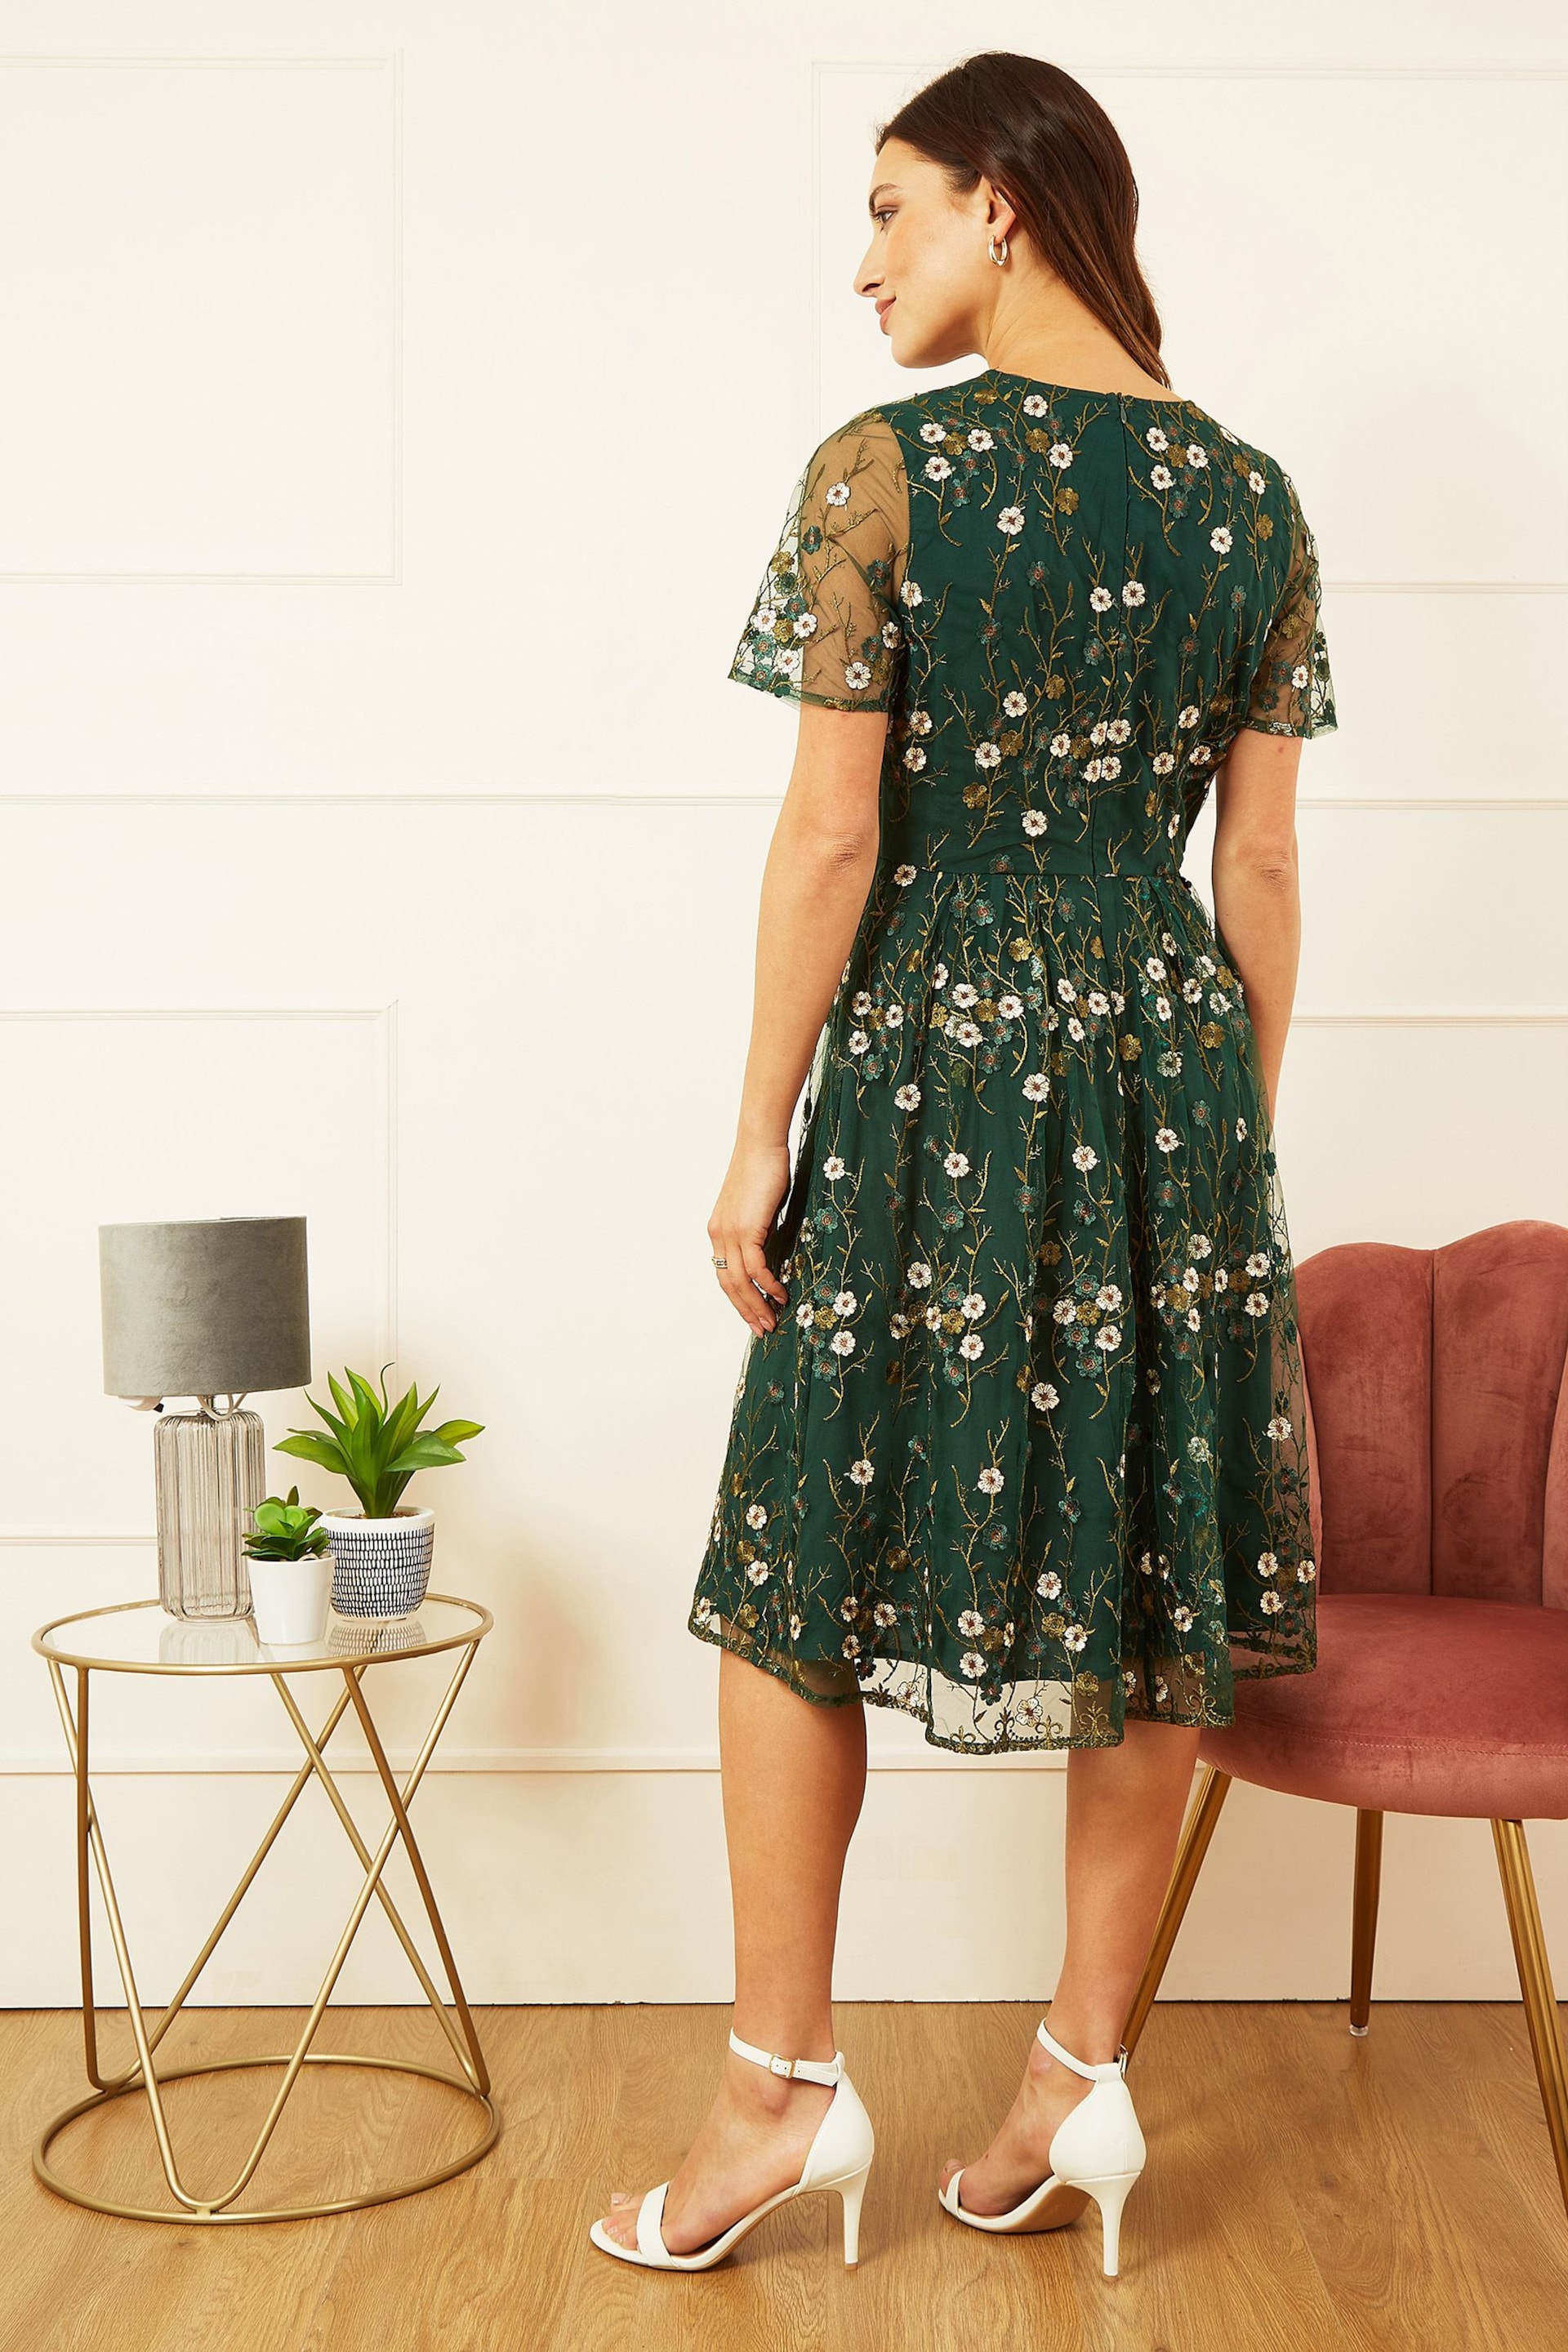 Yumi Green Embroidered Floral Skater Dress - Image 4 of 5